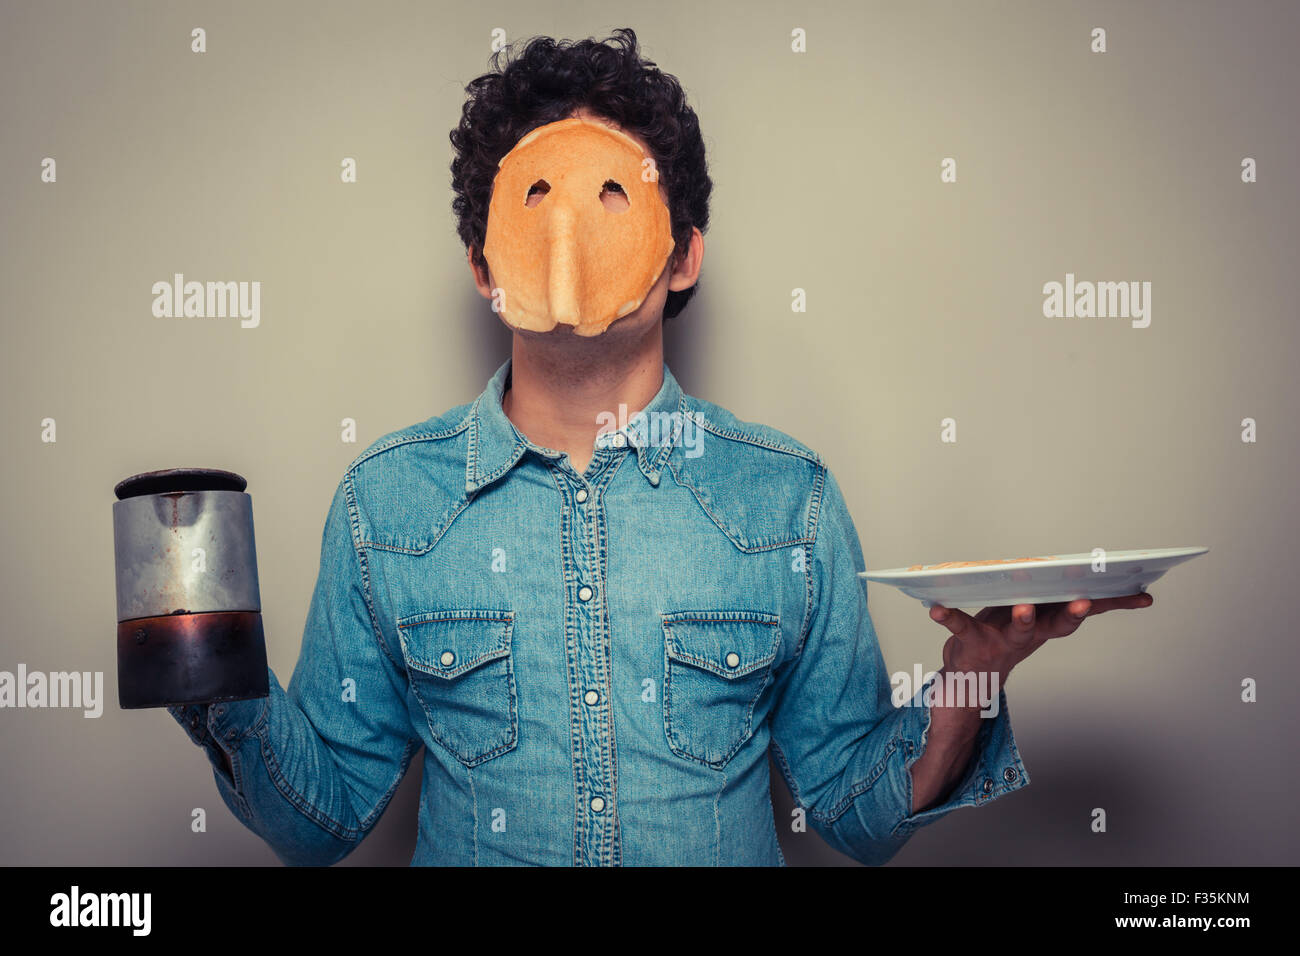 Young man has cut eyeholes in a pancake and is wearing it on his face while holding  a pot of coffee Stock Photo